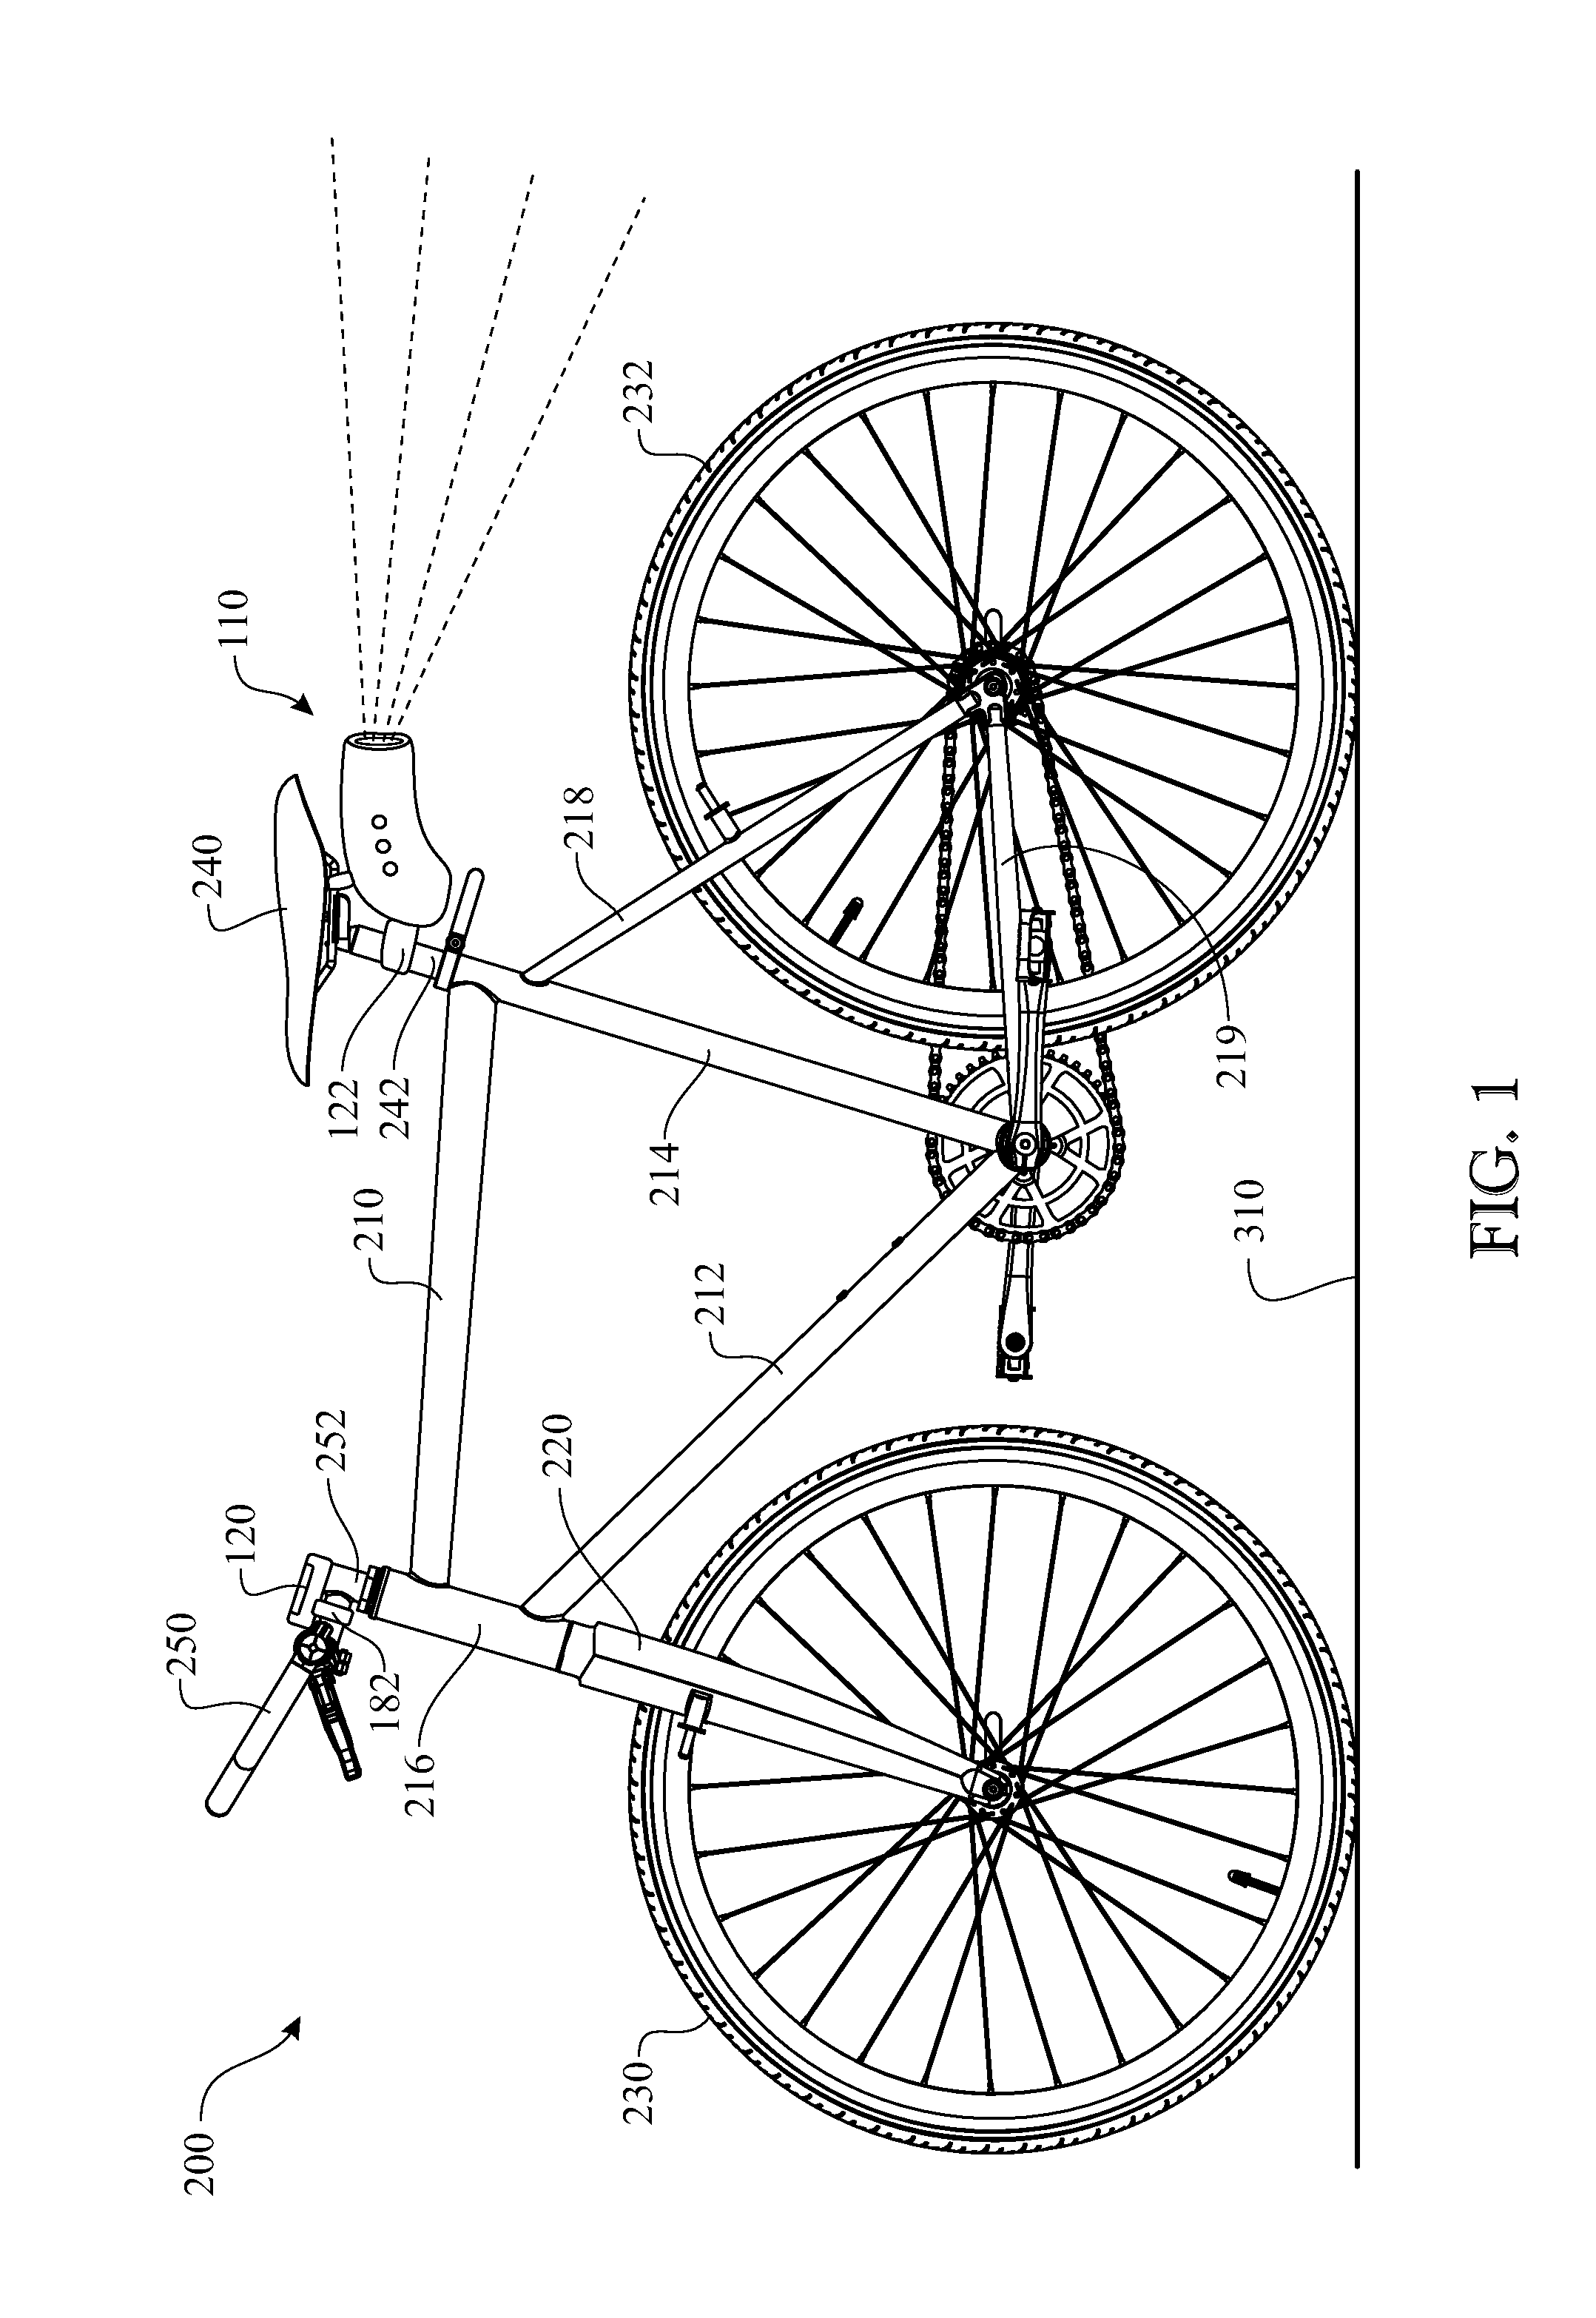 Rear Encroaching Vehicle Monitoring And Alerting System